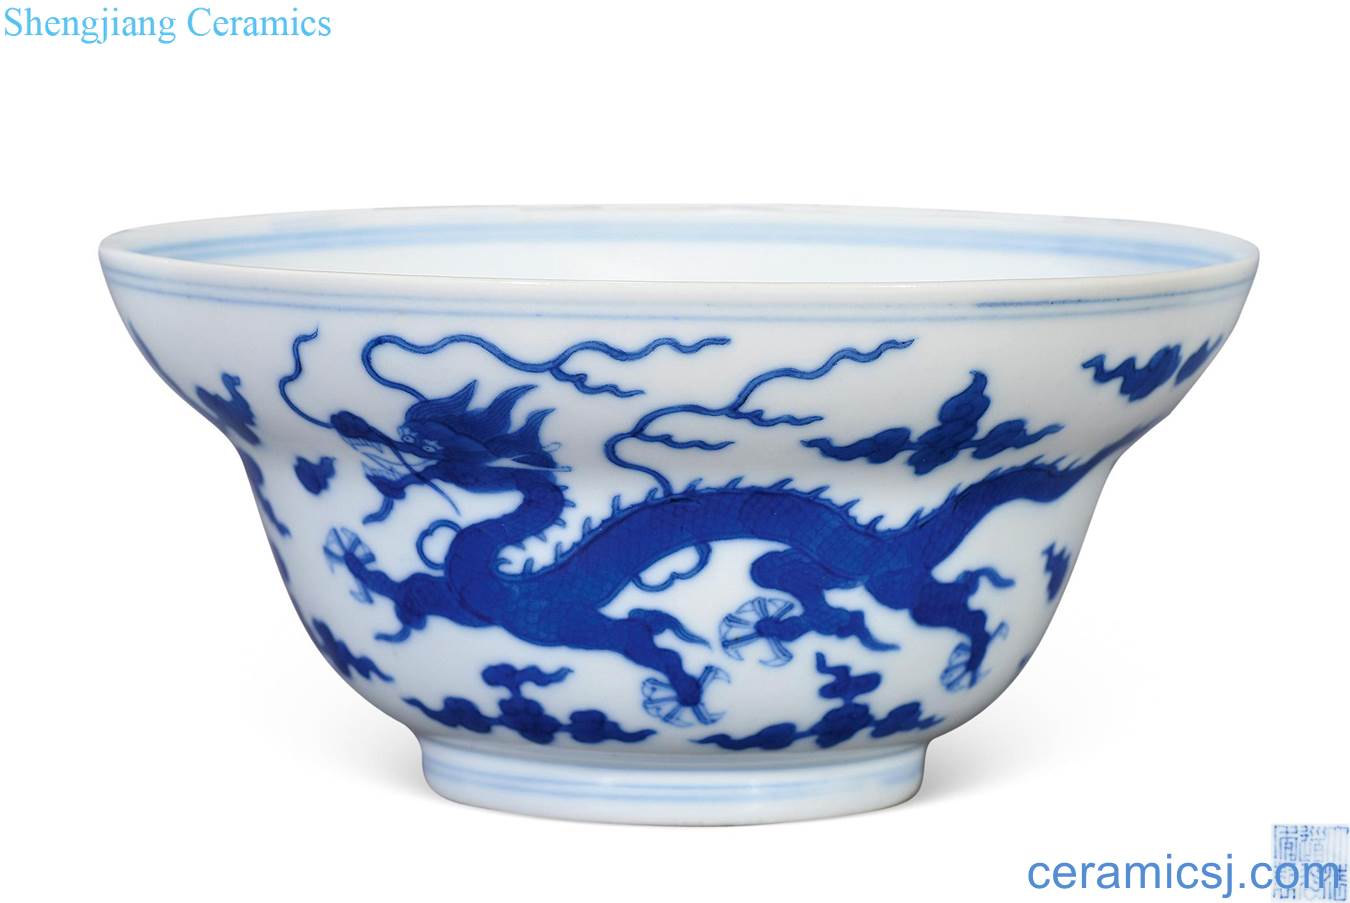 Qing daoguang Blue and white dragon or bowl